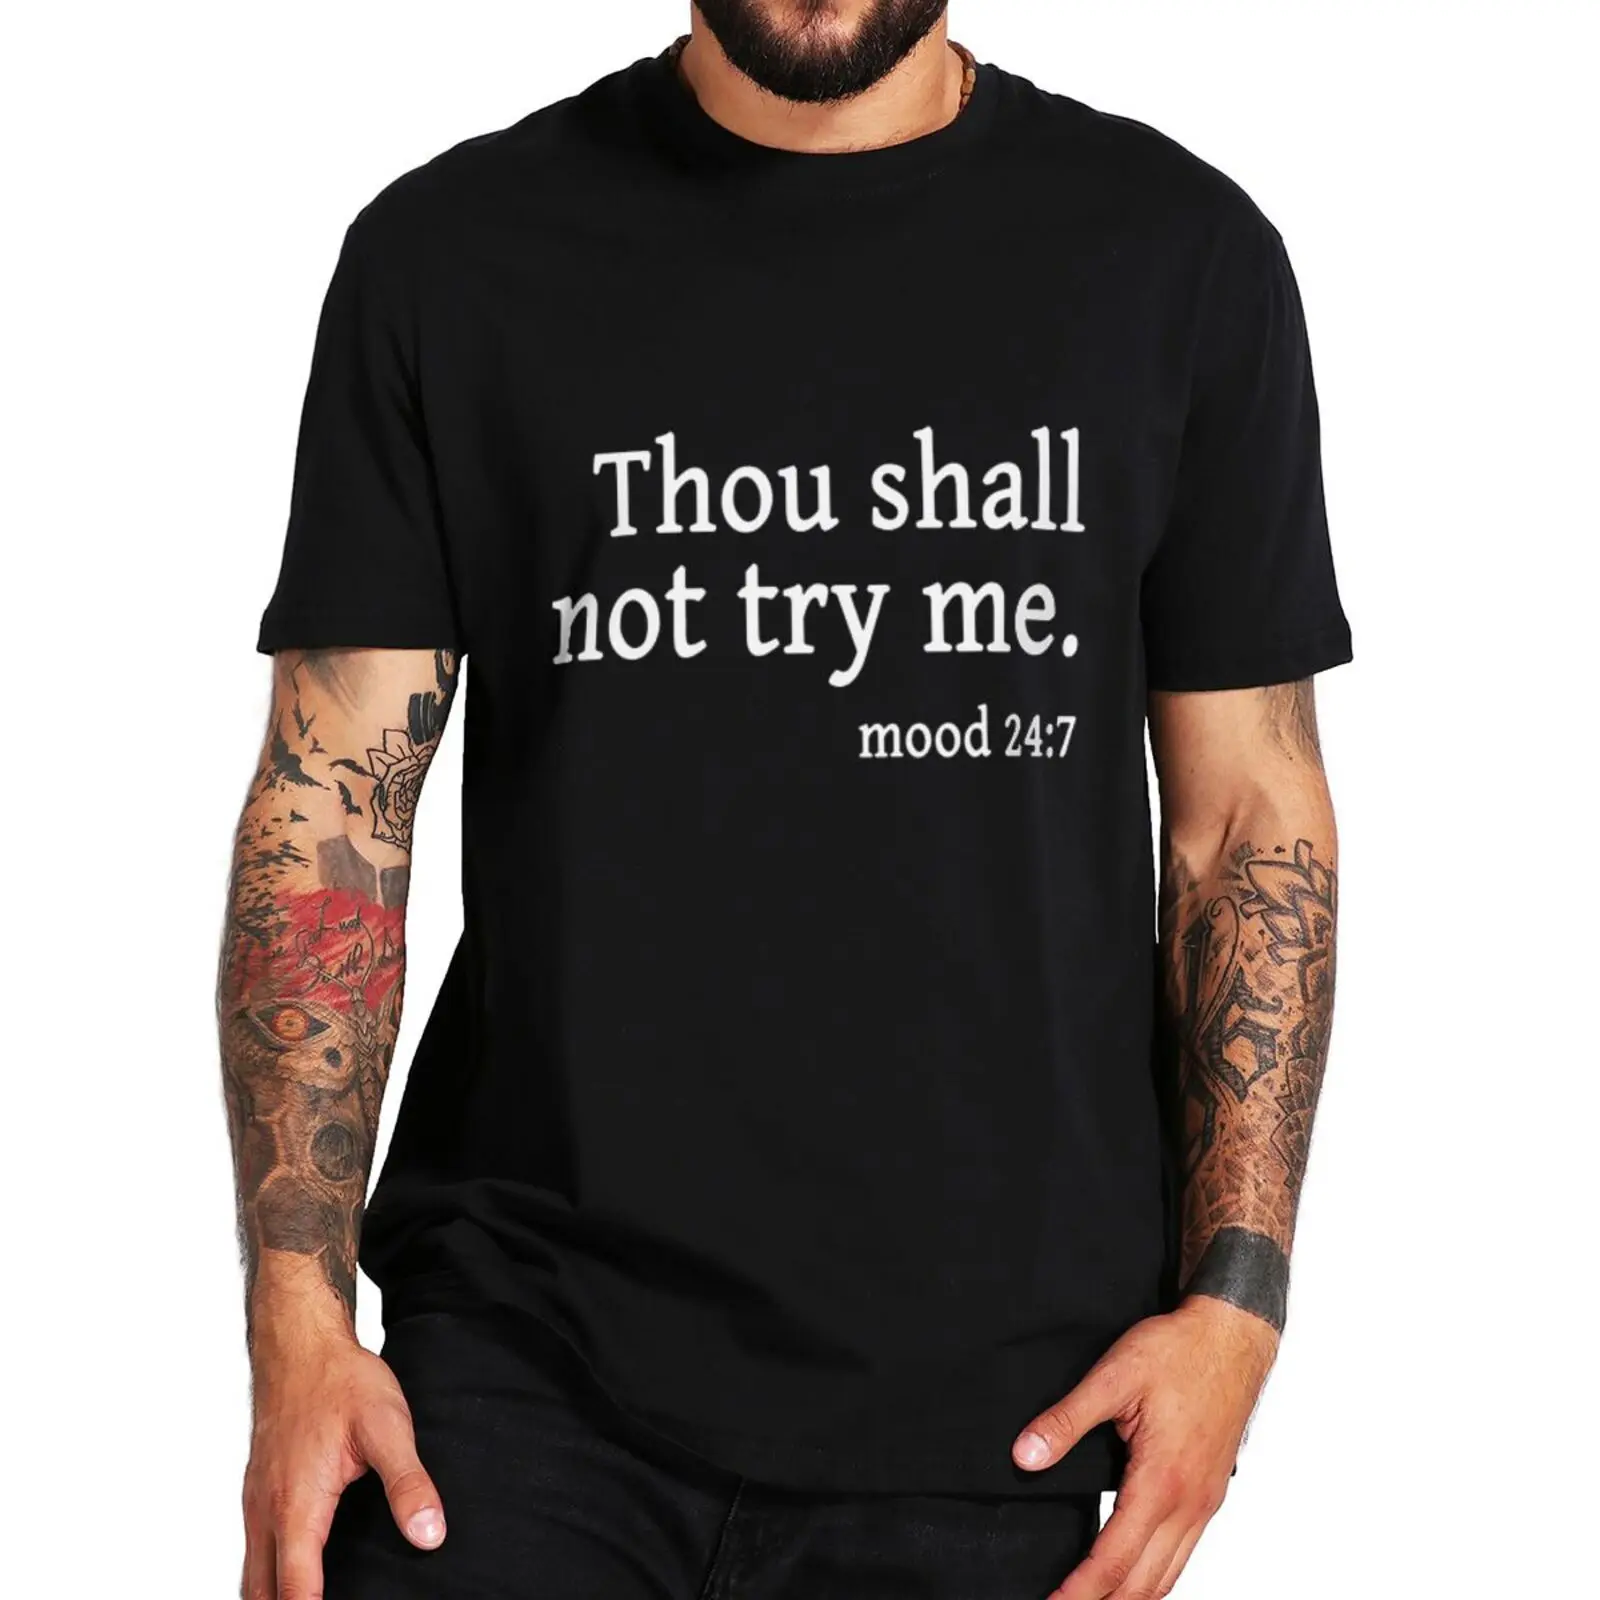 

Thou Shall Not Try Me T Shirt Humor Sayings Slogan Graphic Short Sleeve Casual 100% Cotton Unisex Summer O-neck T-shirt EU Size